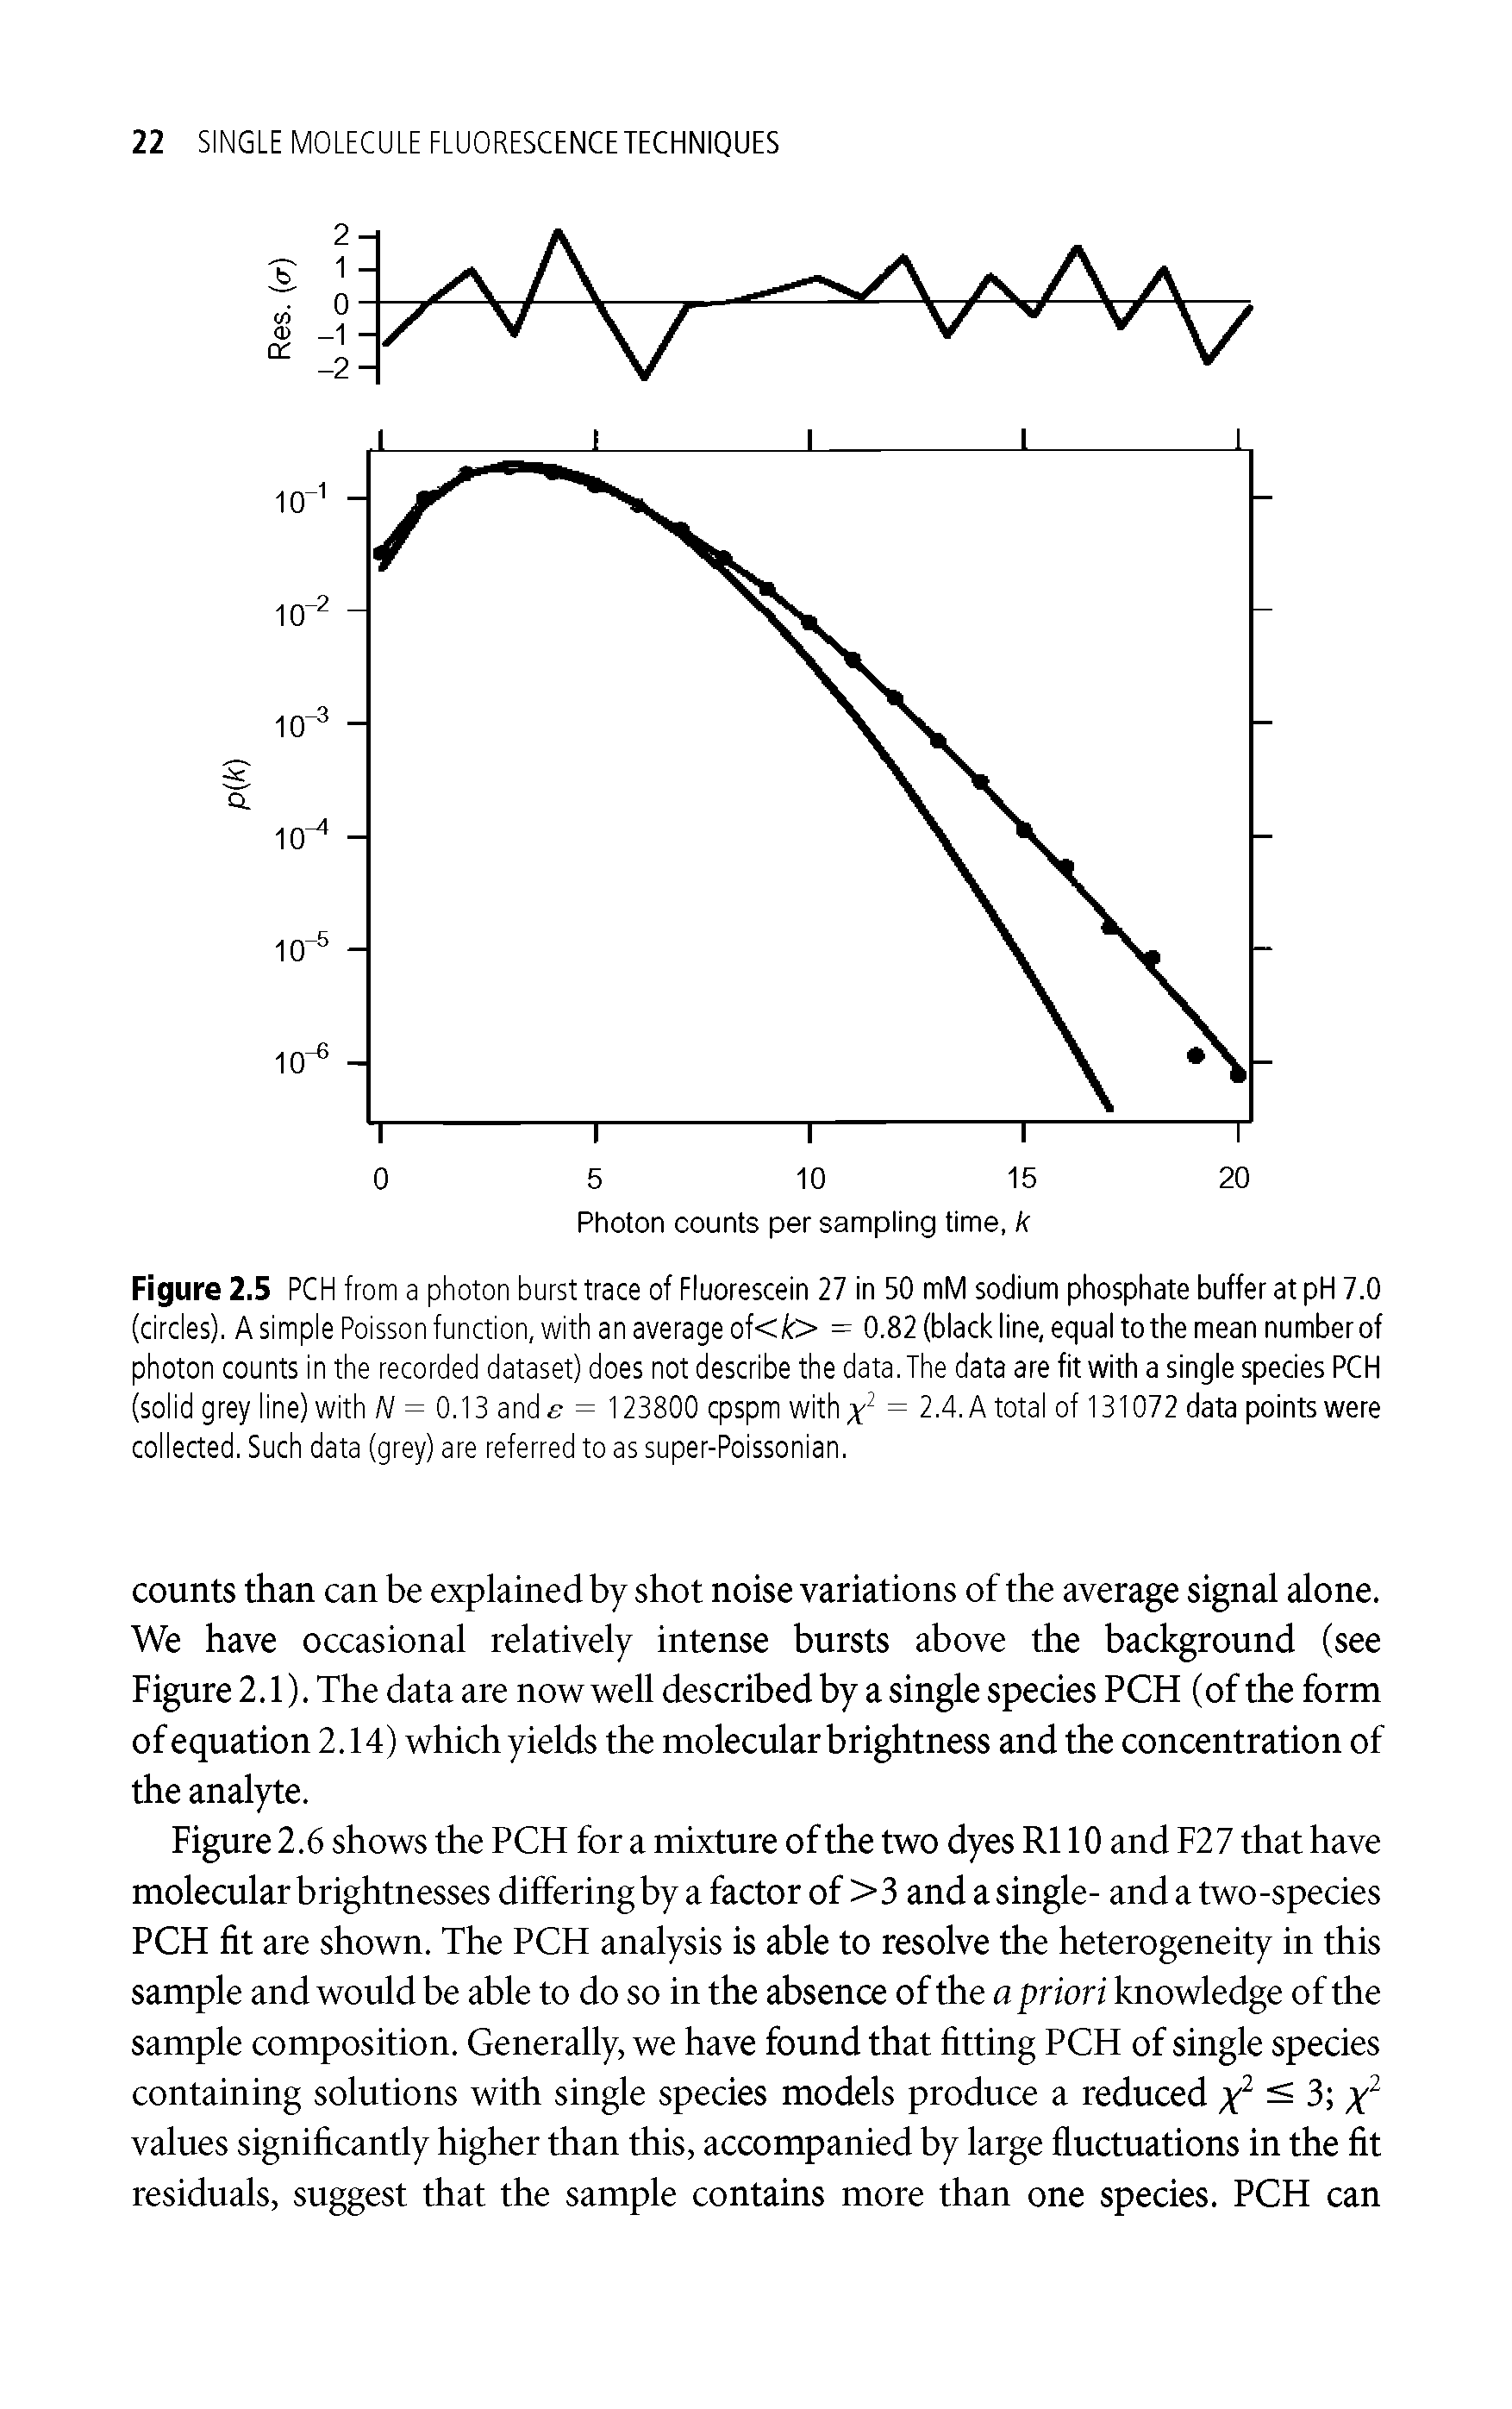 Figure 2.5 PCH from a photon burst trace of Fluorescein 27 in 50 mM sodium phosphate buffer at pH 7.0 (circles). A simple Poisson function, with an average of</r> = 0.82 (black line, equal tothe mean number of photon counts in the recorded dataset) does not describe the data. The data are fit with a single species PCH (solid grey line) with /V = 0.13 ande = 123800 cpspm with, = 2.4. A total of 131072 data points were collected. Such data (grey) are referred to as super-Poissonian.